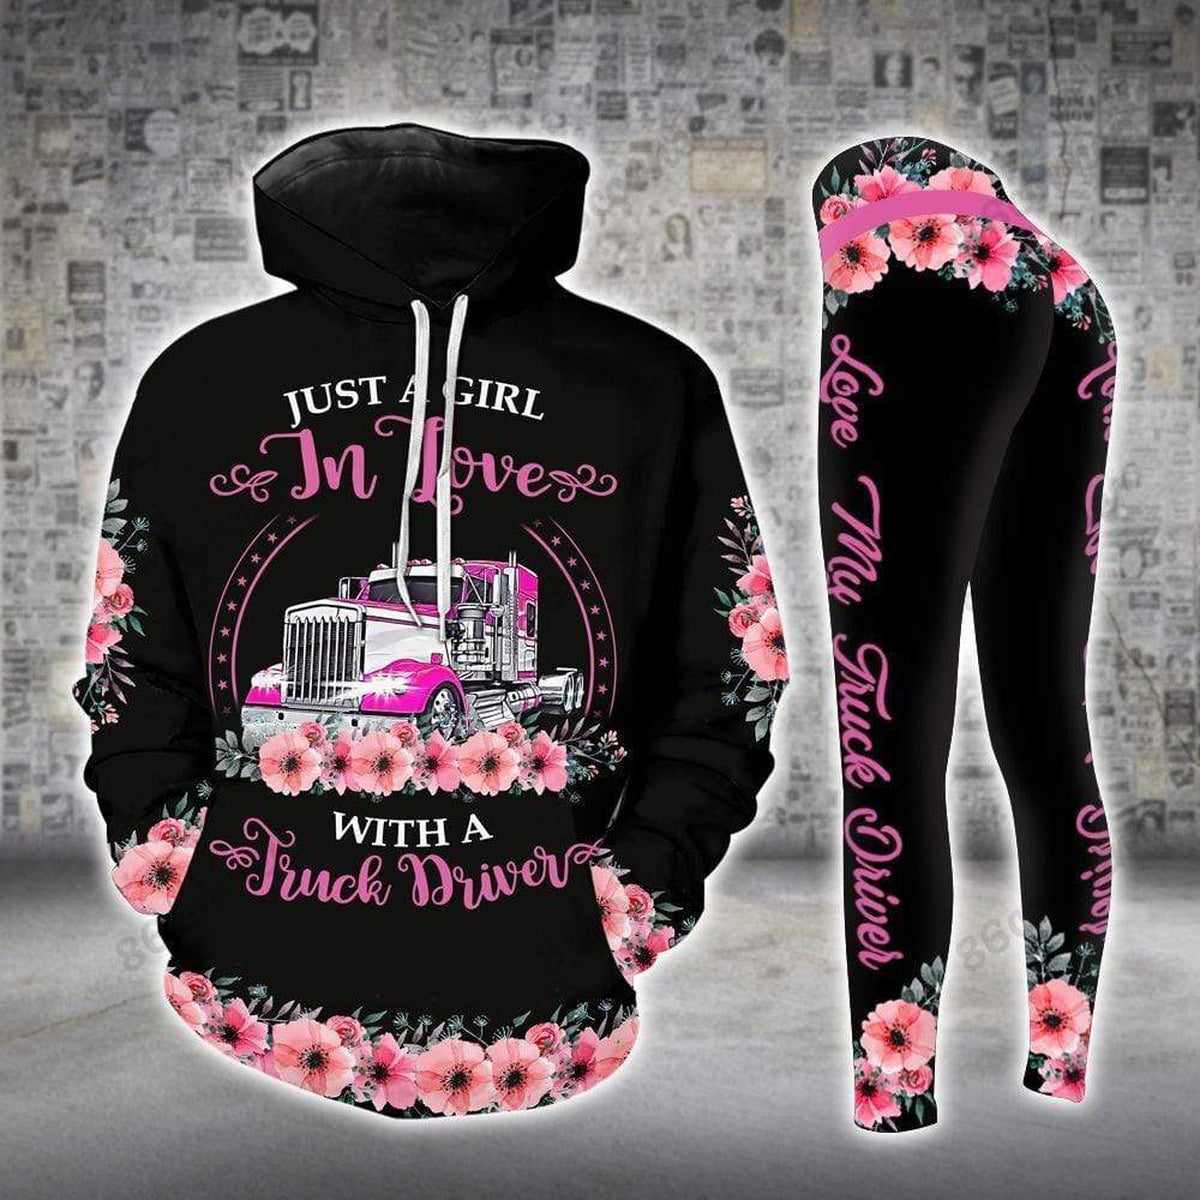 A Girl In Love With Truck Driver Legging Hoodie , Truck Driver Legging Hoodie